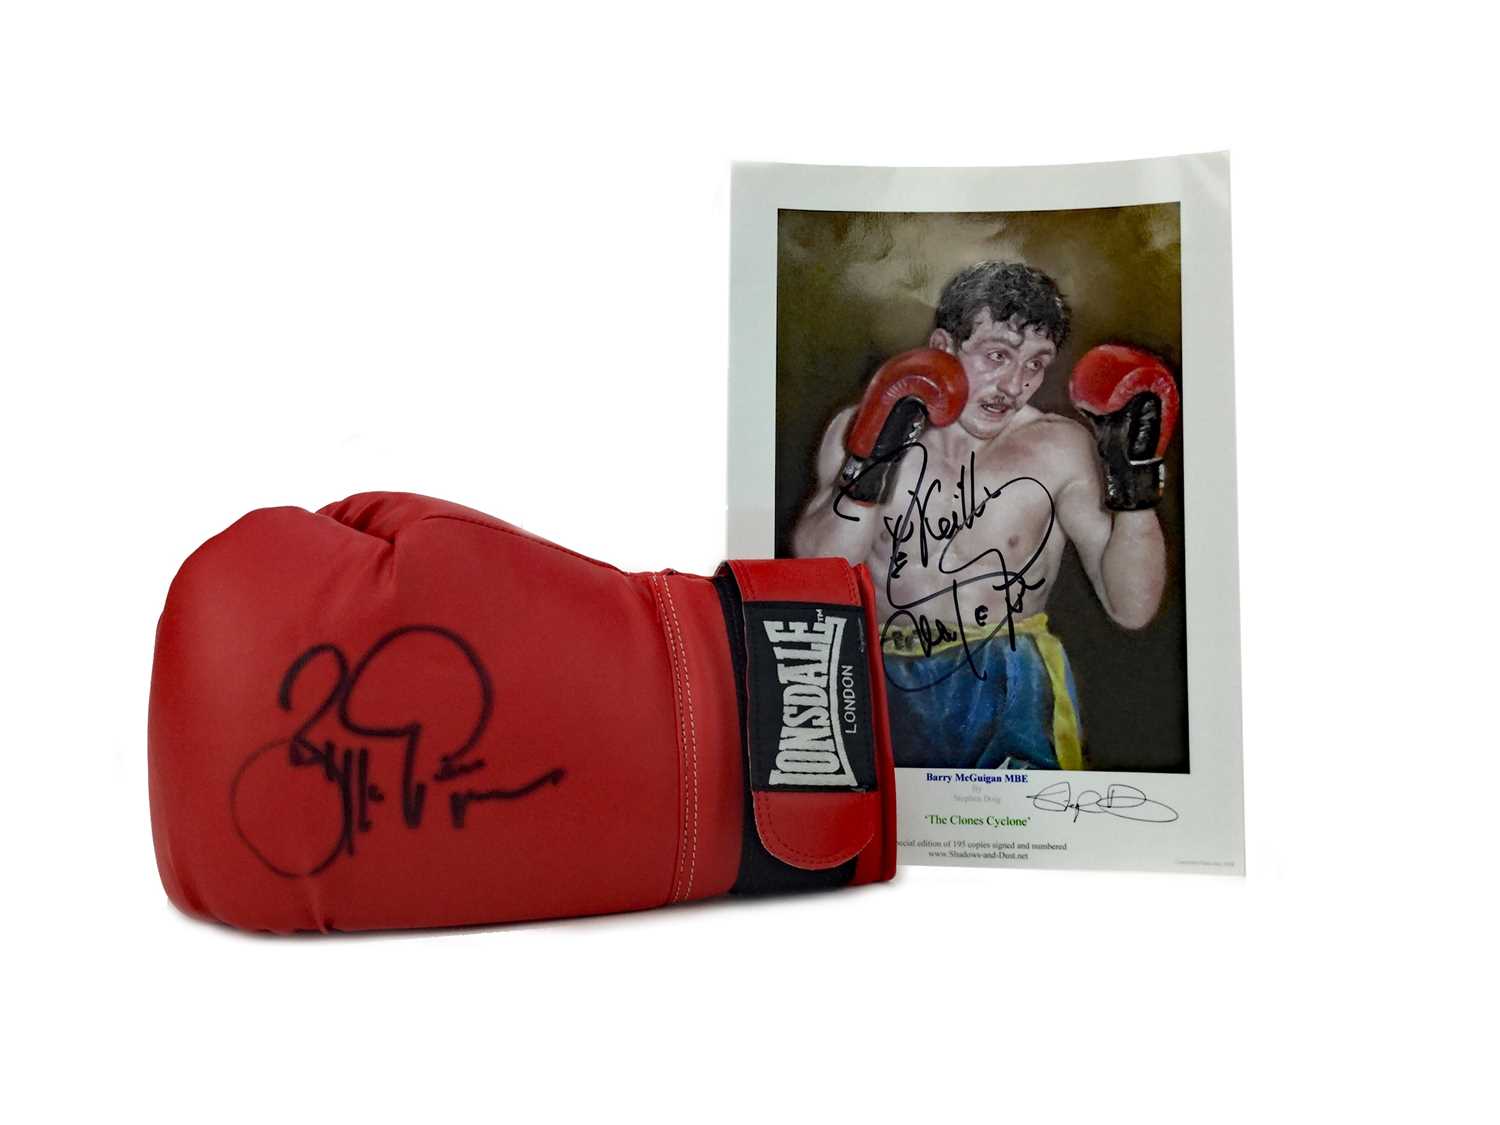 Lot 1756 - A BOXING GLOVE SIGNED BY BARRY MCGUIGAN AND A SIGNED PRINT OF THE BOXER